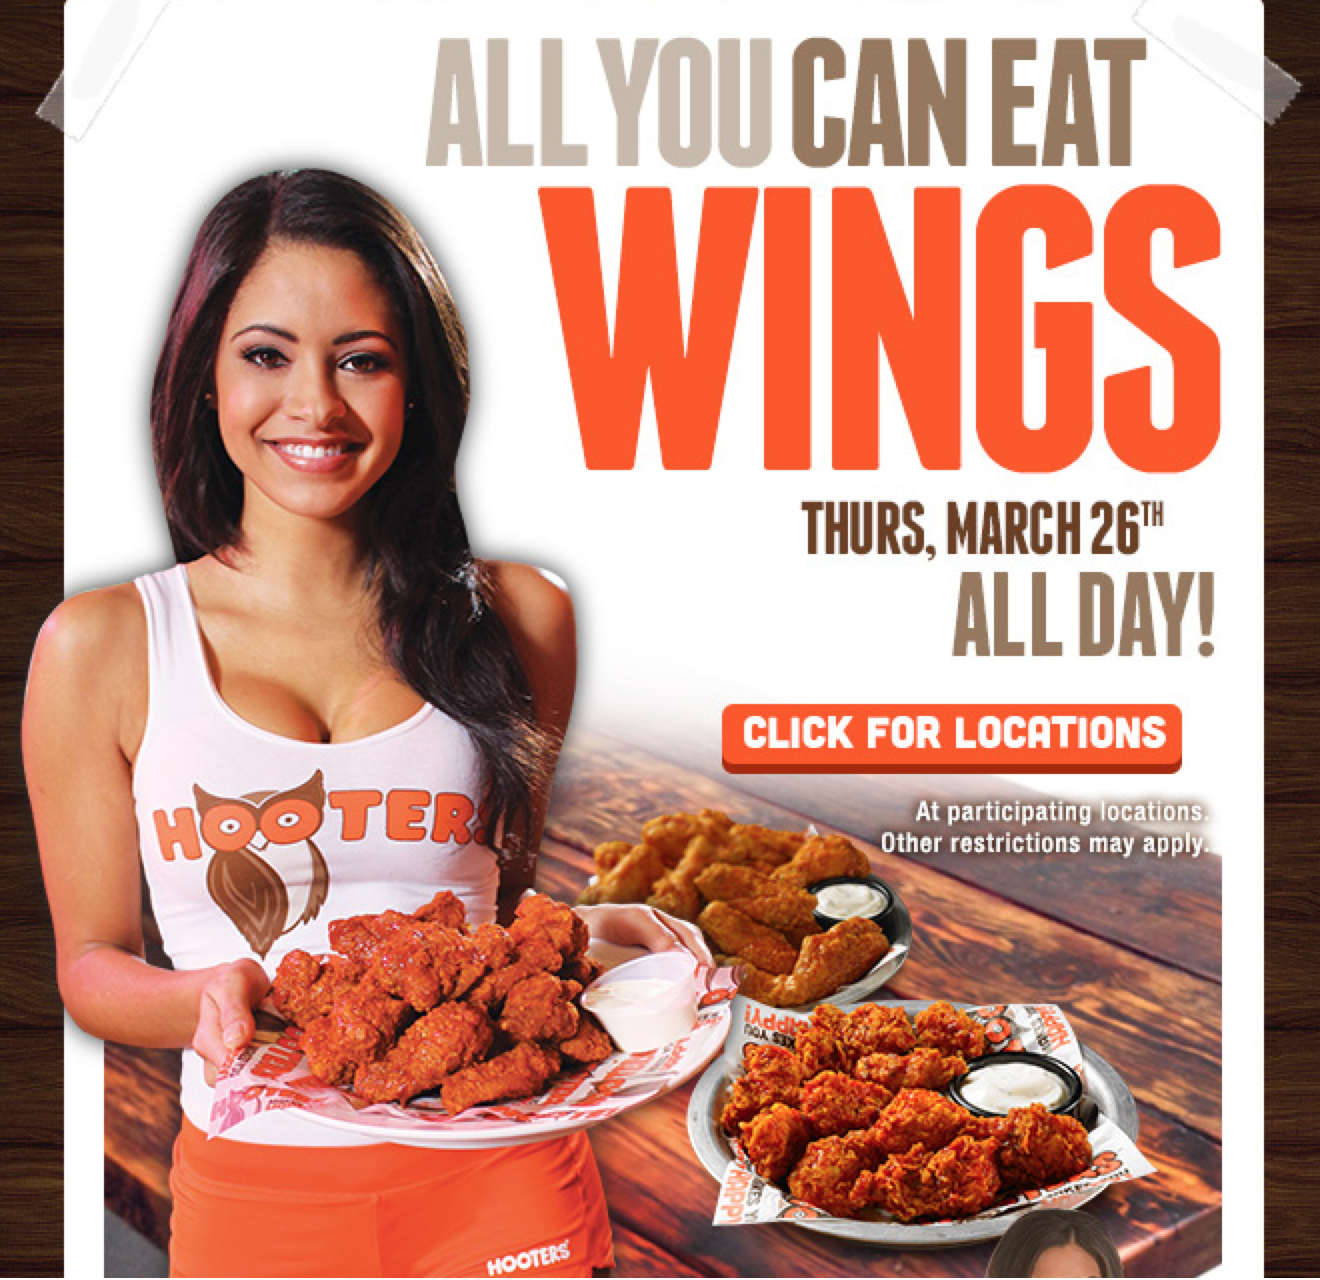 Rockville Nights All you can eat wings today at Hooters of Rockville